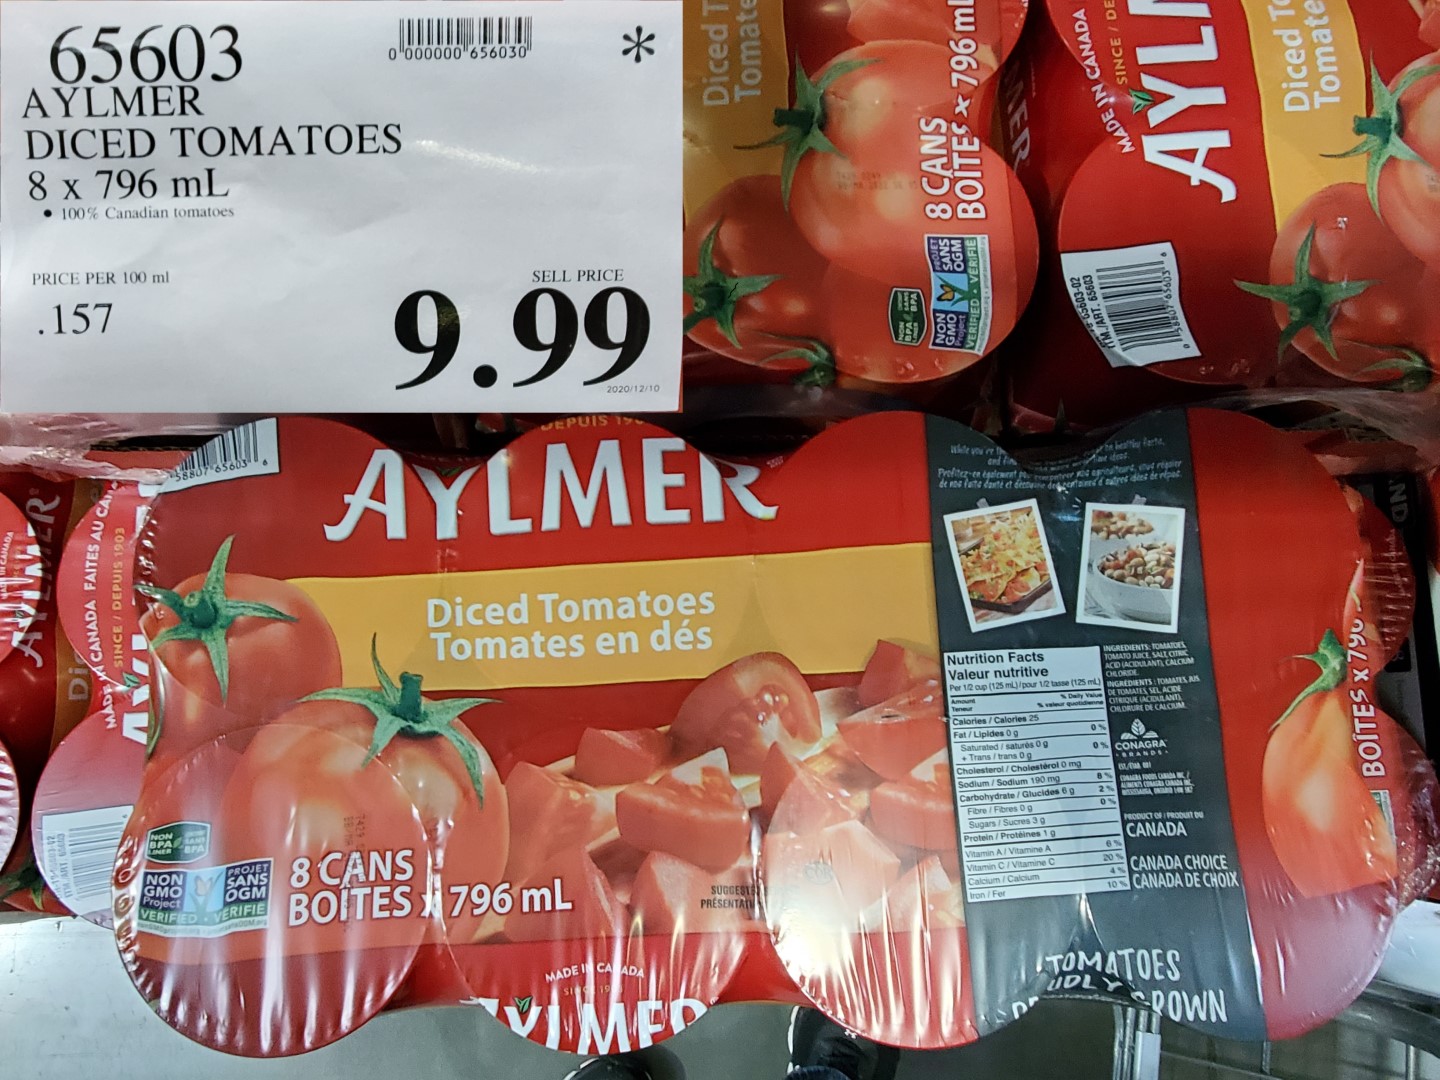 aylmer diced tomatoes